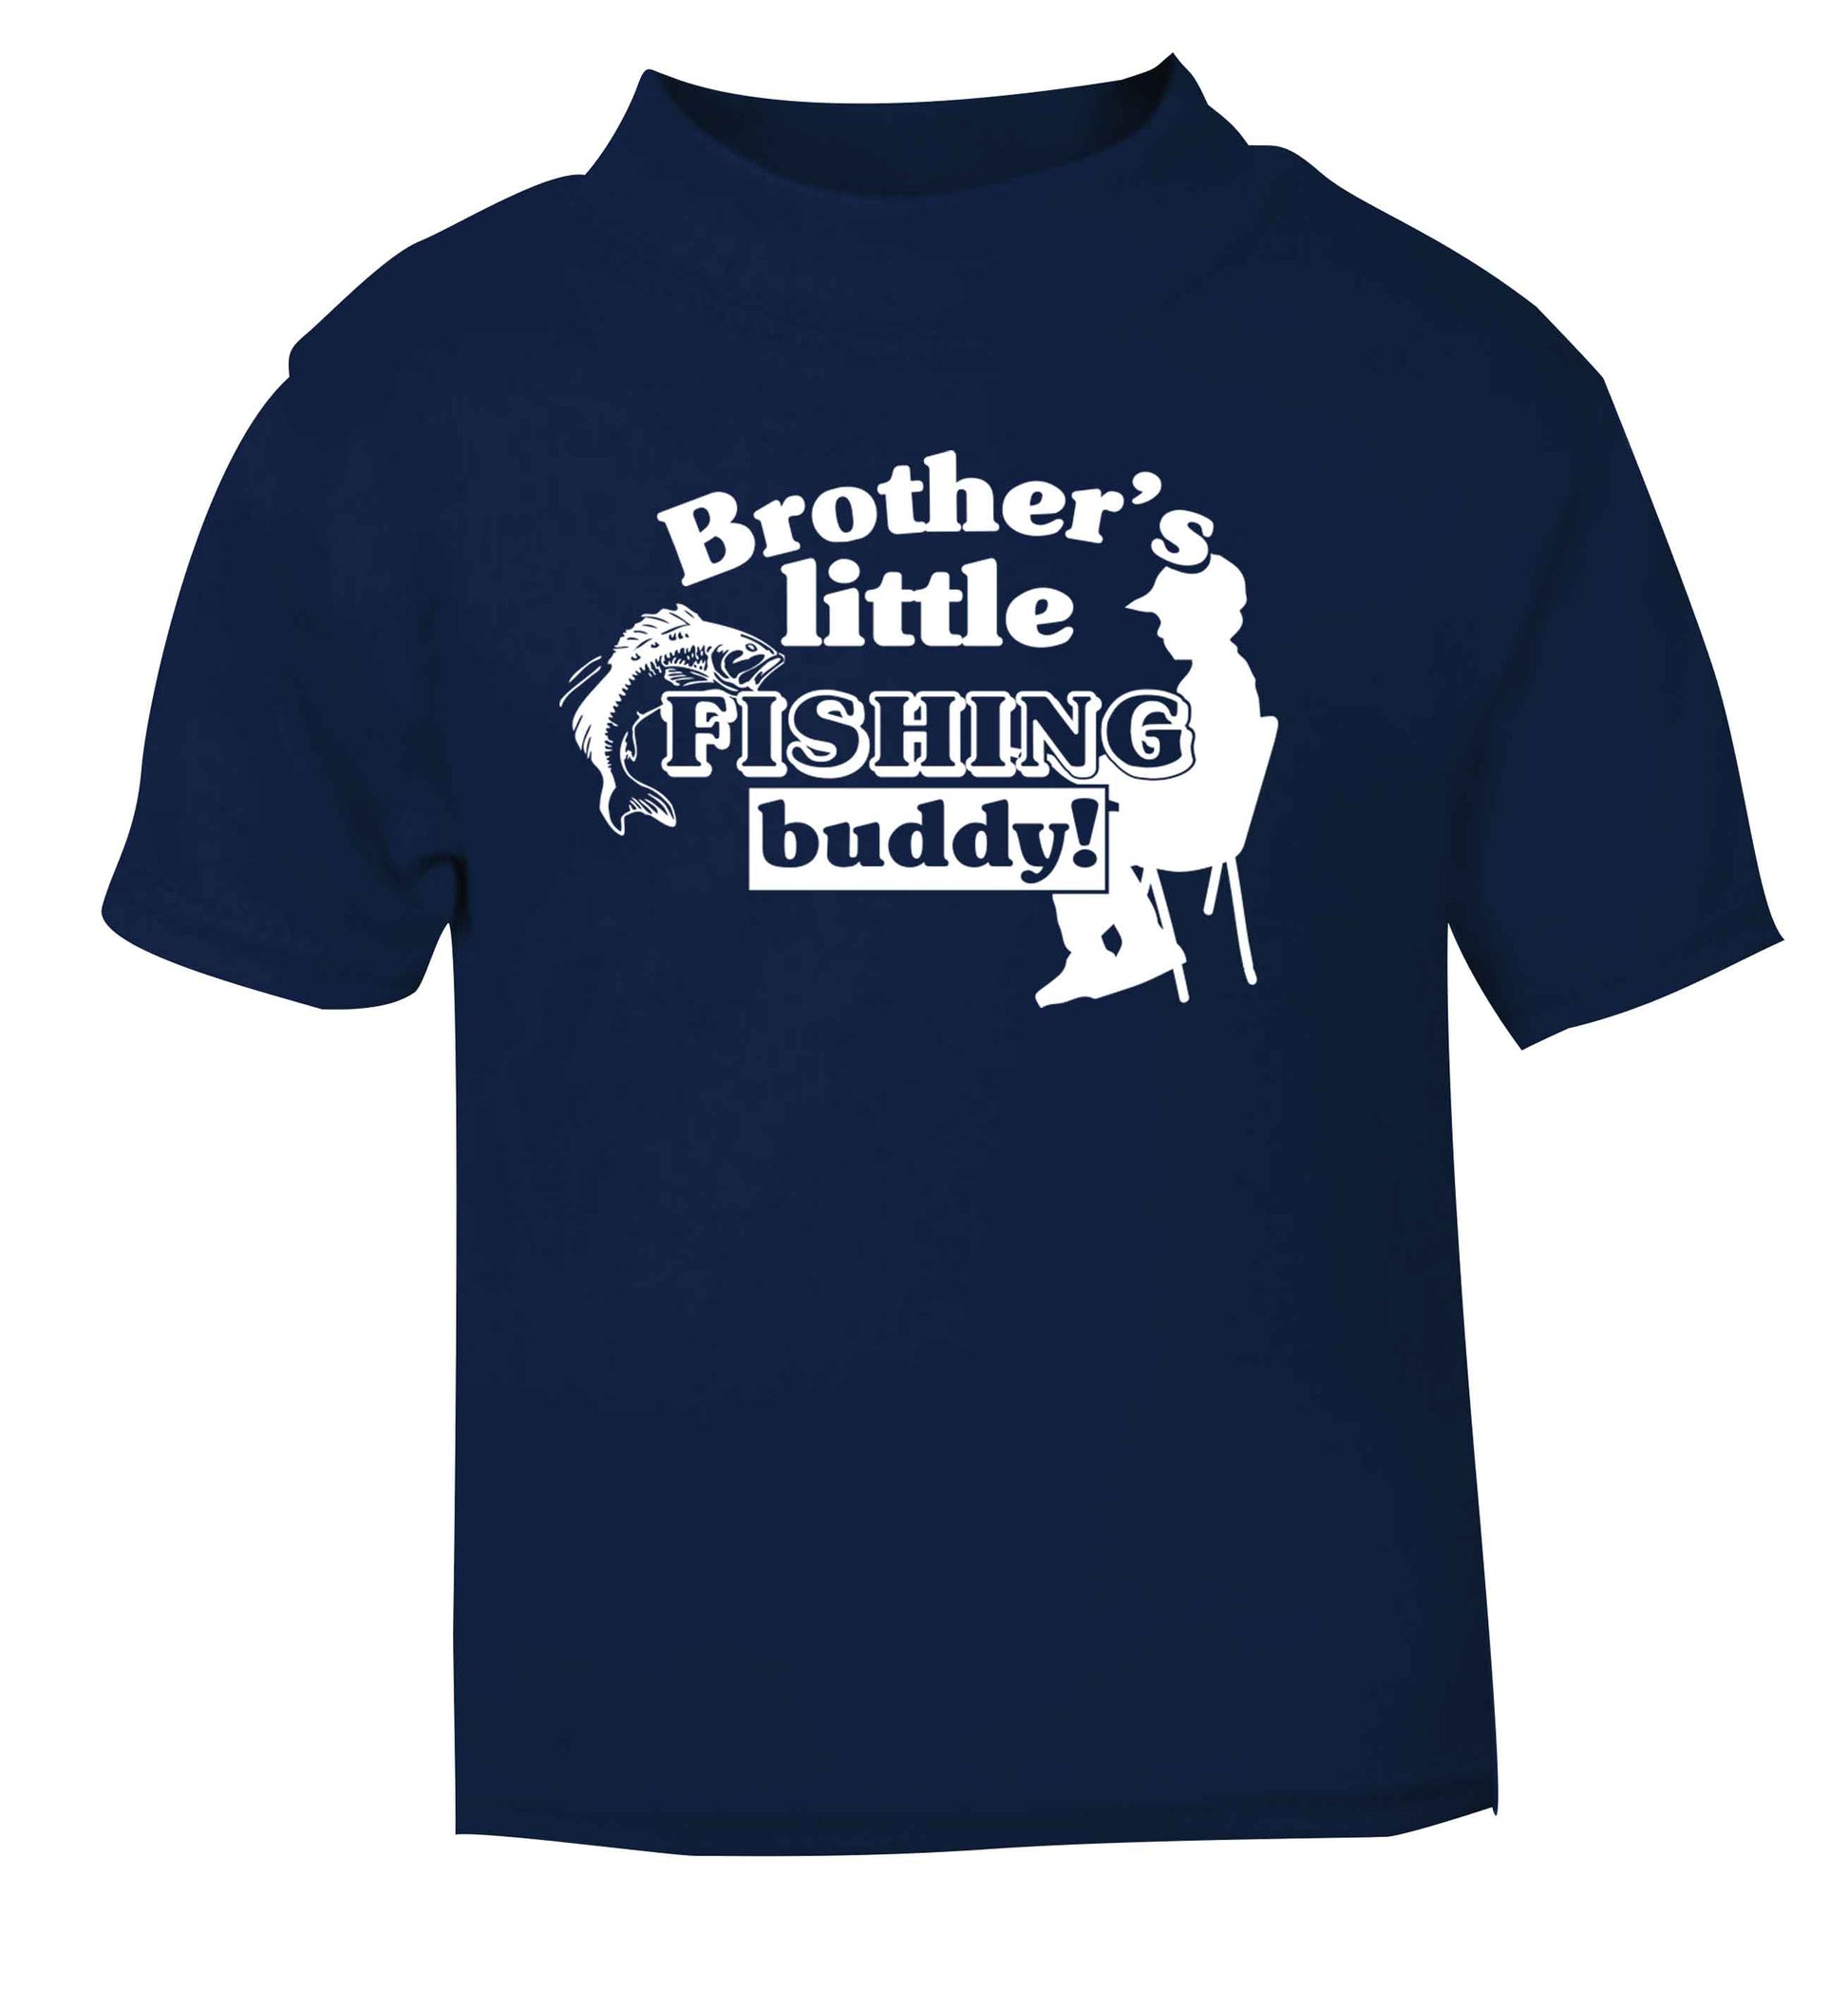 Brother's little fishing buddy navy Baby Toddler Tshirt 2 Years